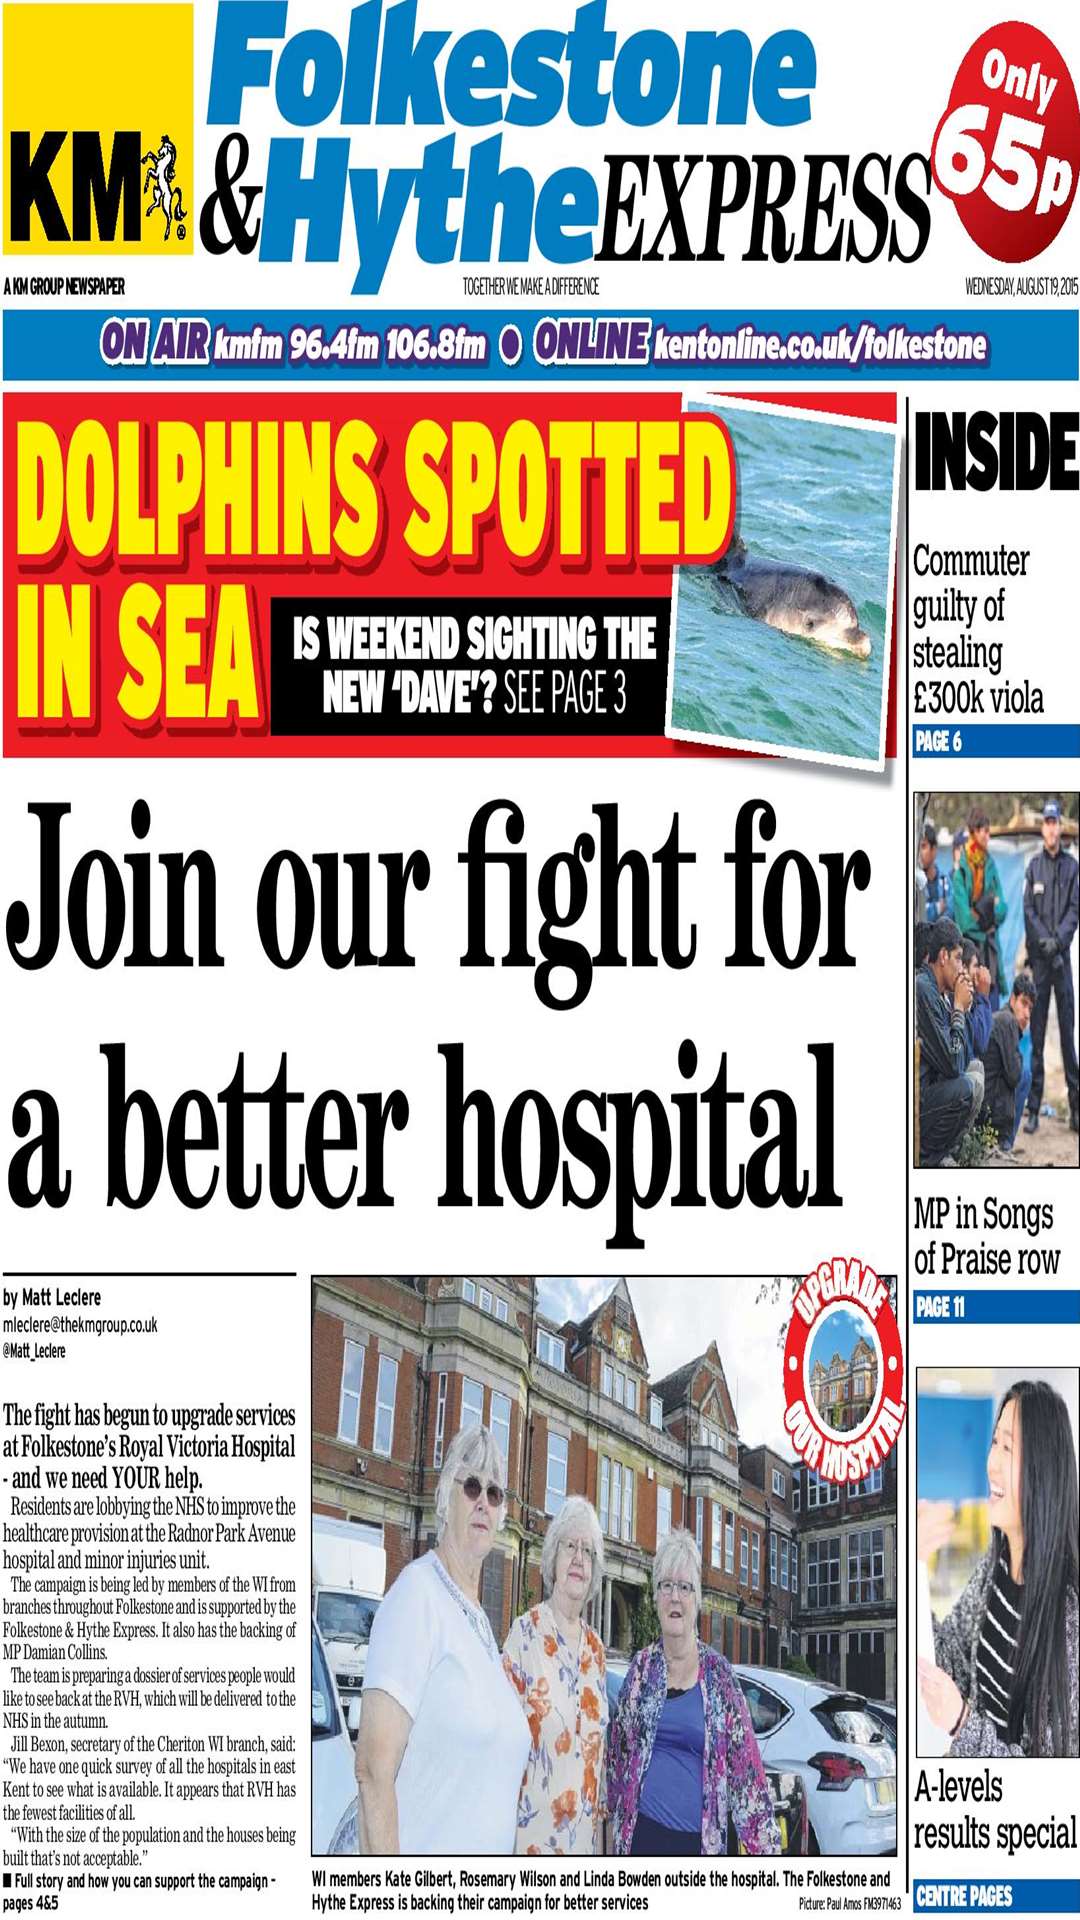 Our front page of the Folkestone & Hythe Express backing the campaign